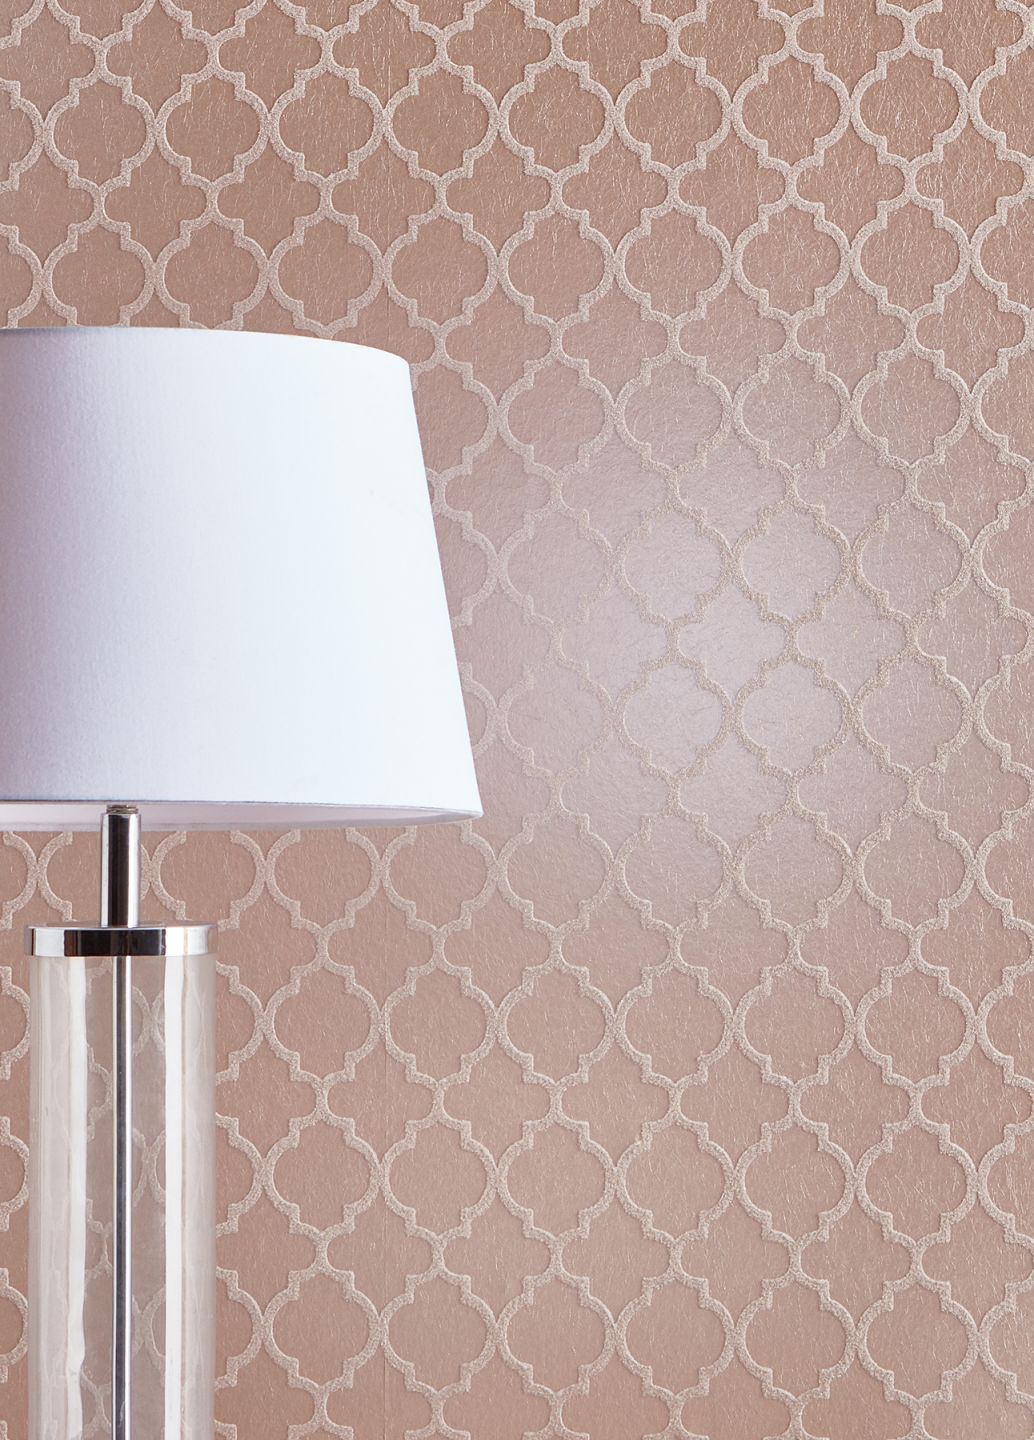 A rosewood-coloured glass bead wallpaper with a trellis pattern behind a table lamp with a white shade